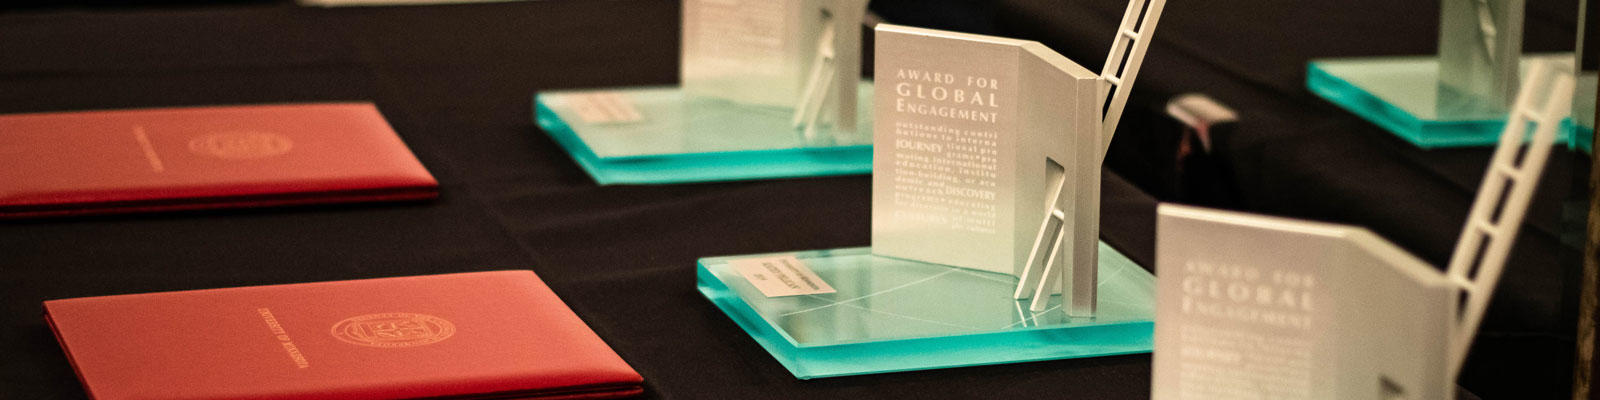 close-up of a table full of award trophies